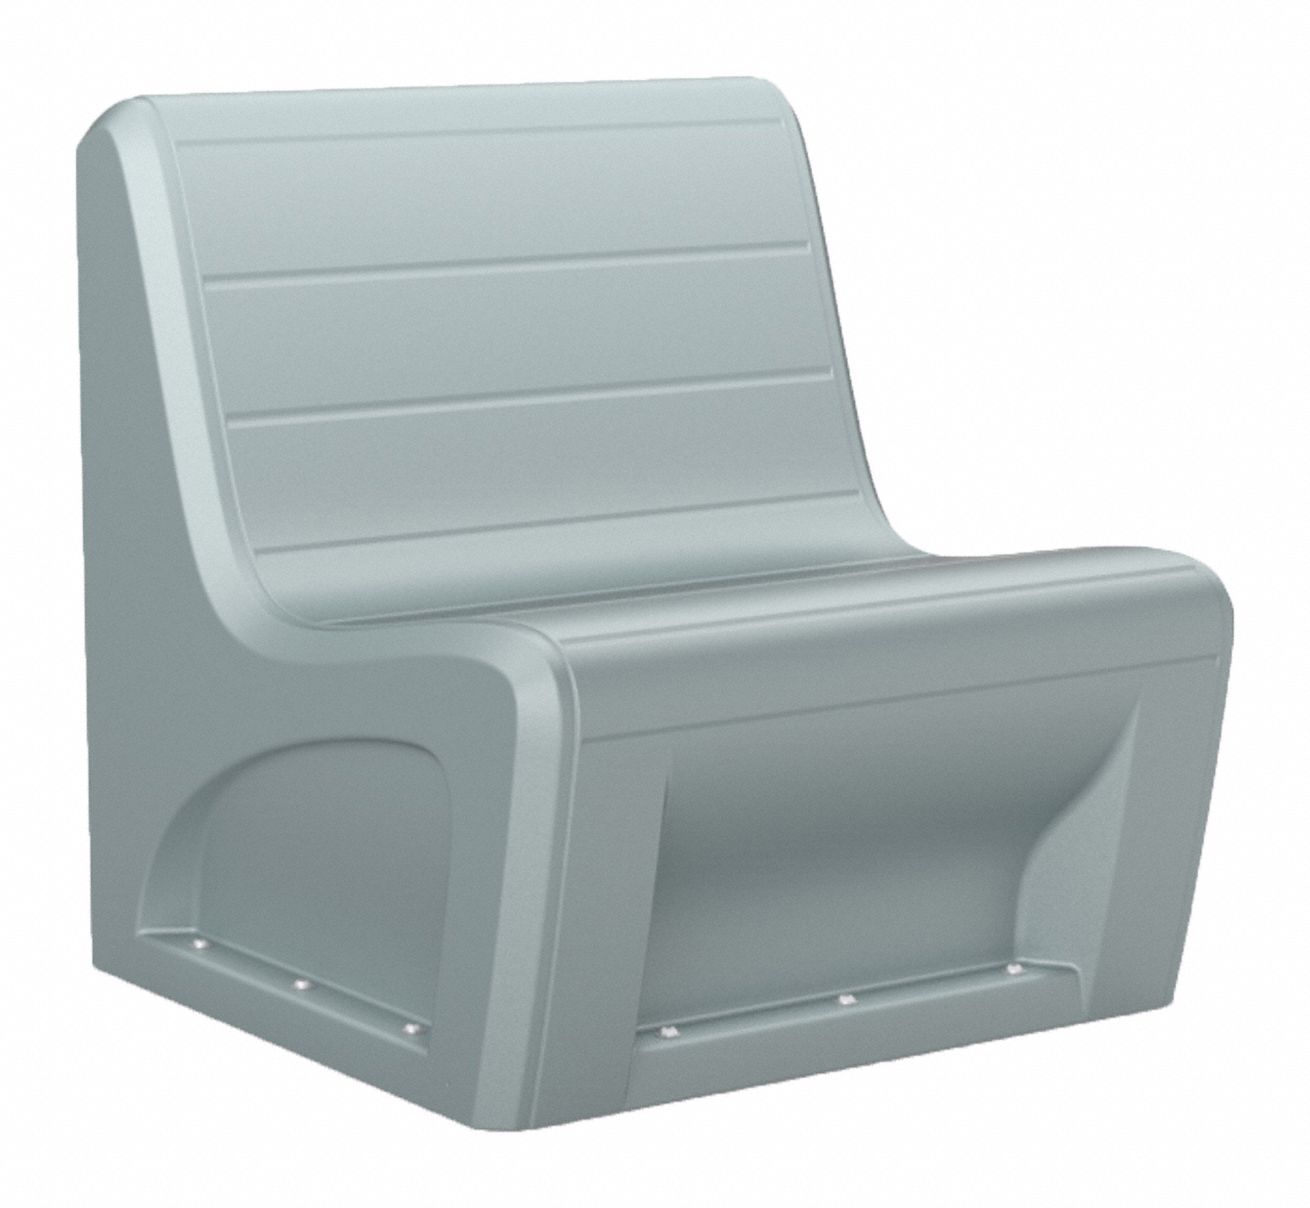 Sabre Sectional Chair Gray: 30 1/2 in Wd, 32 in Lg, 33 in Ht, 500 lb Wt Capacity, Gray